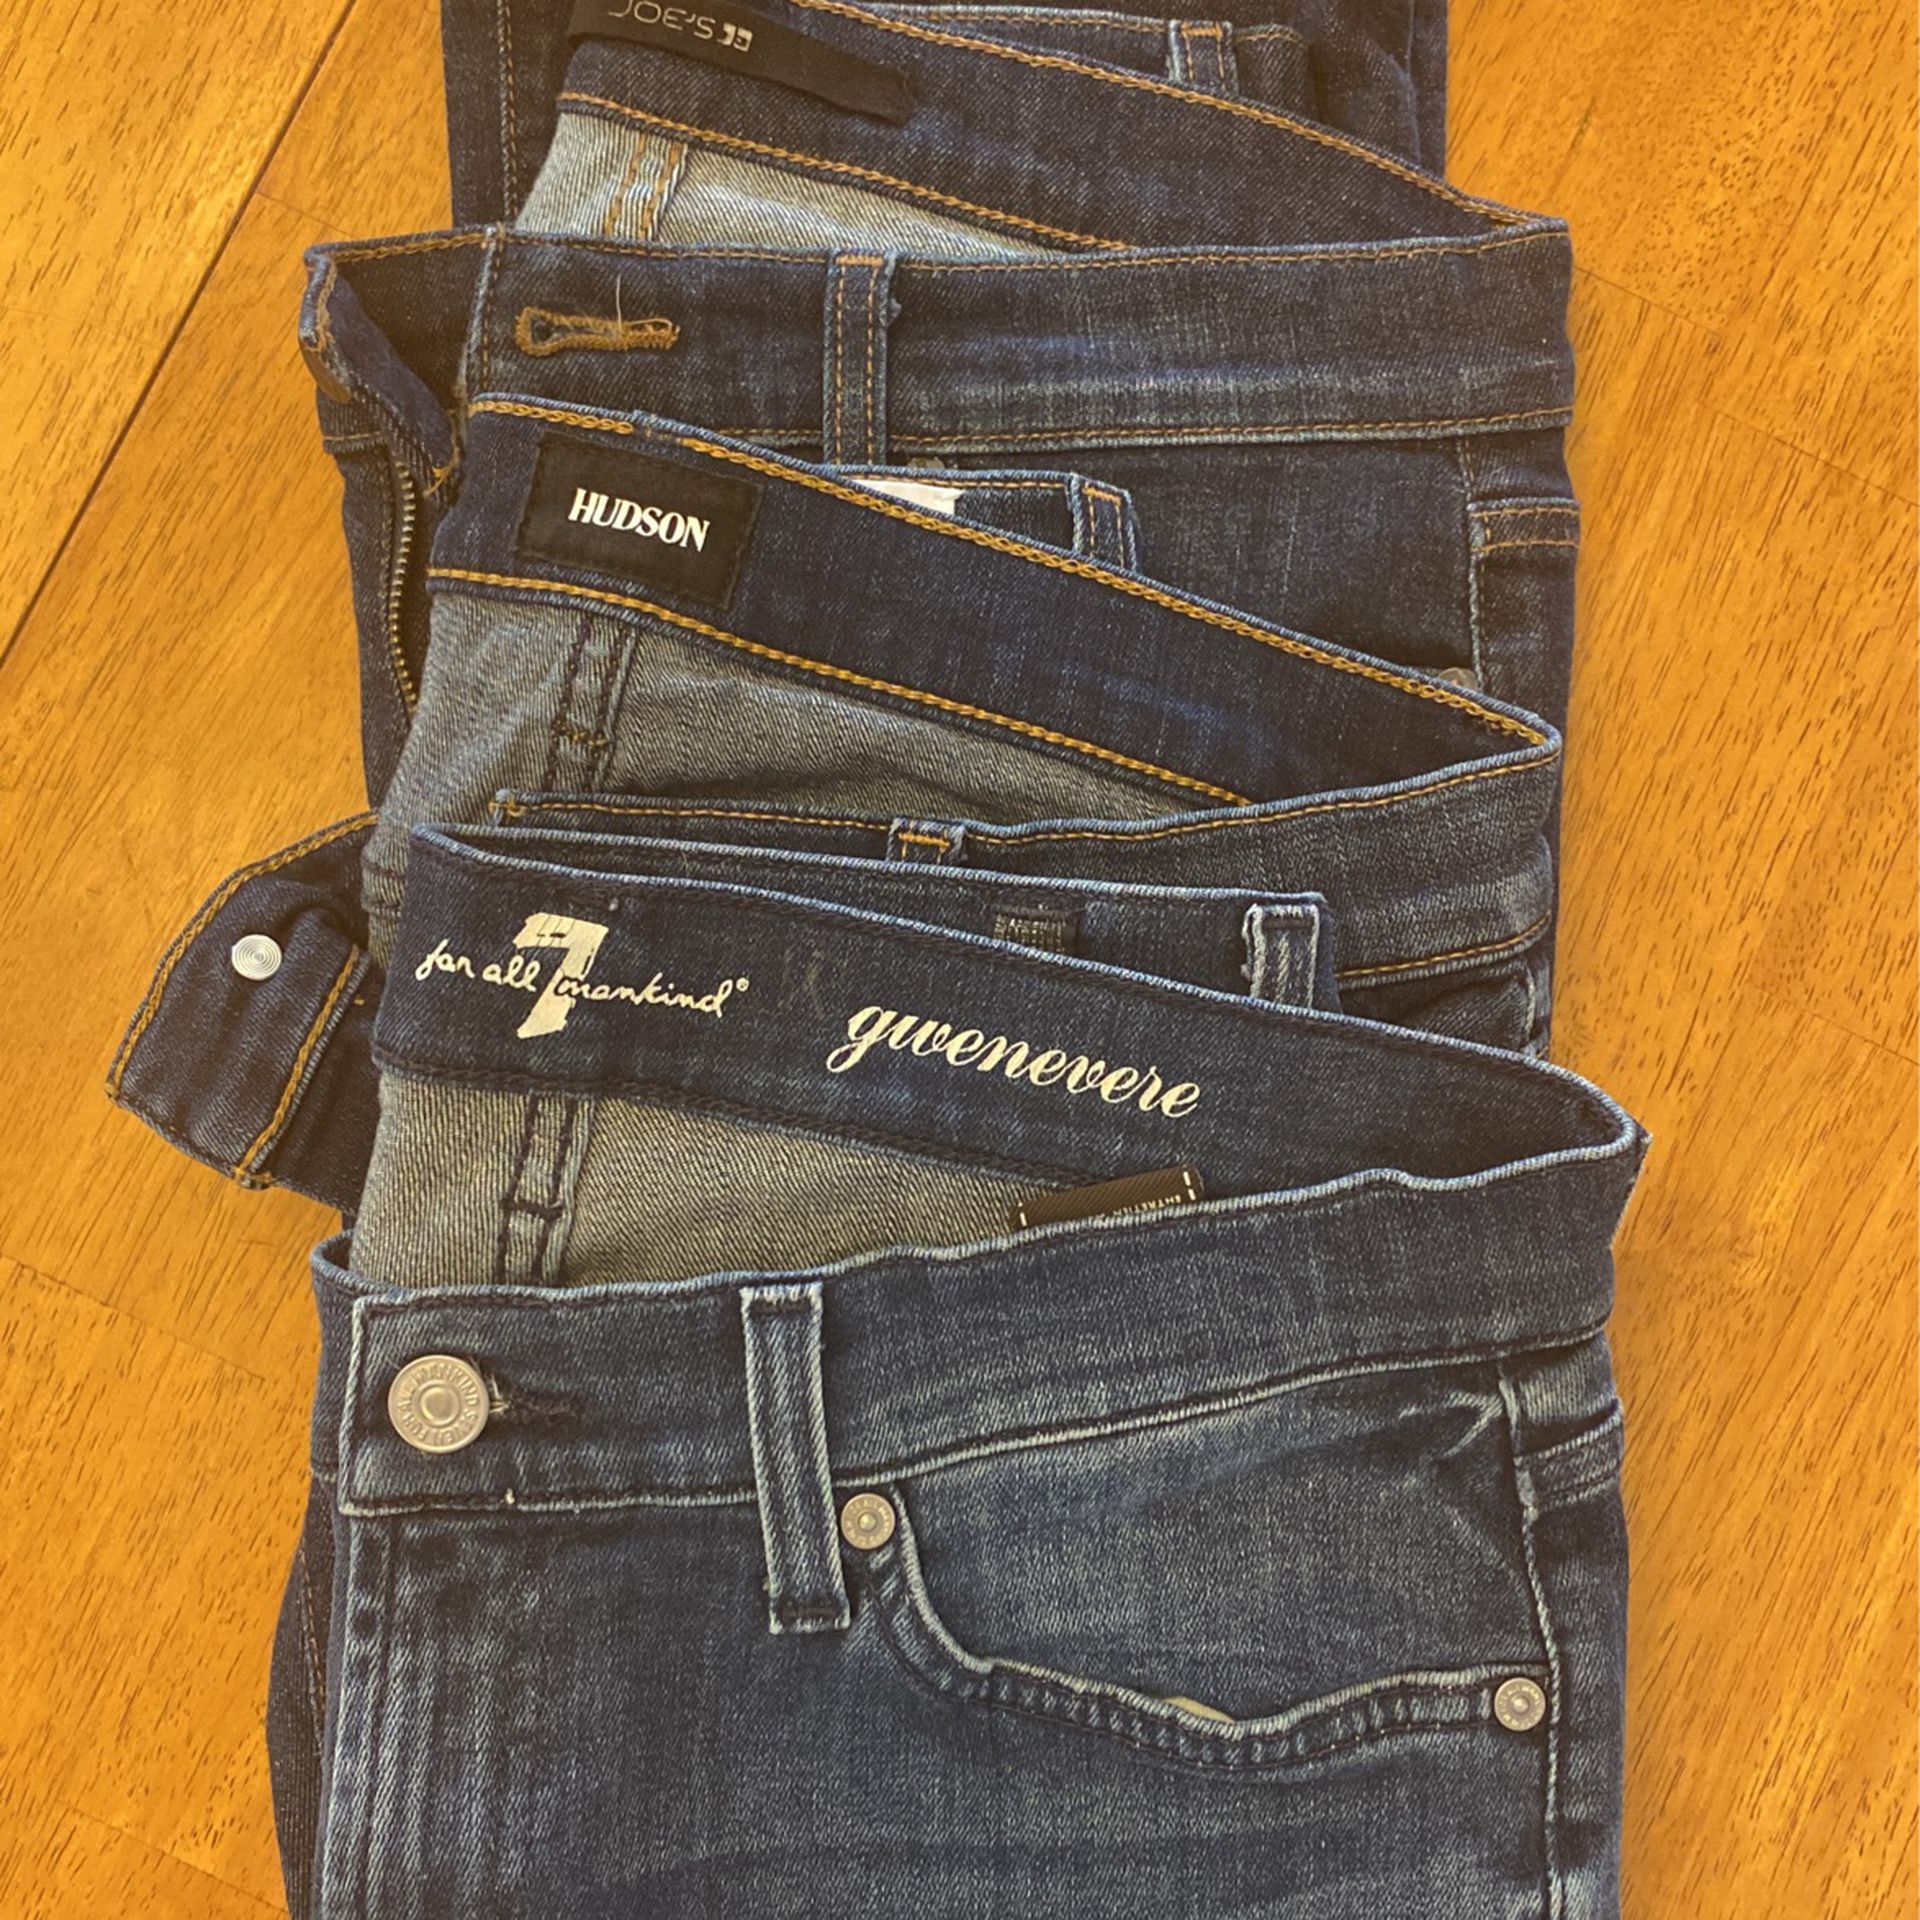 Name Brand Jeans 